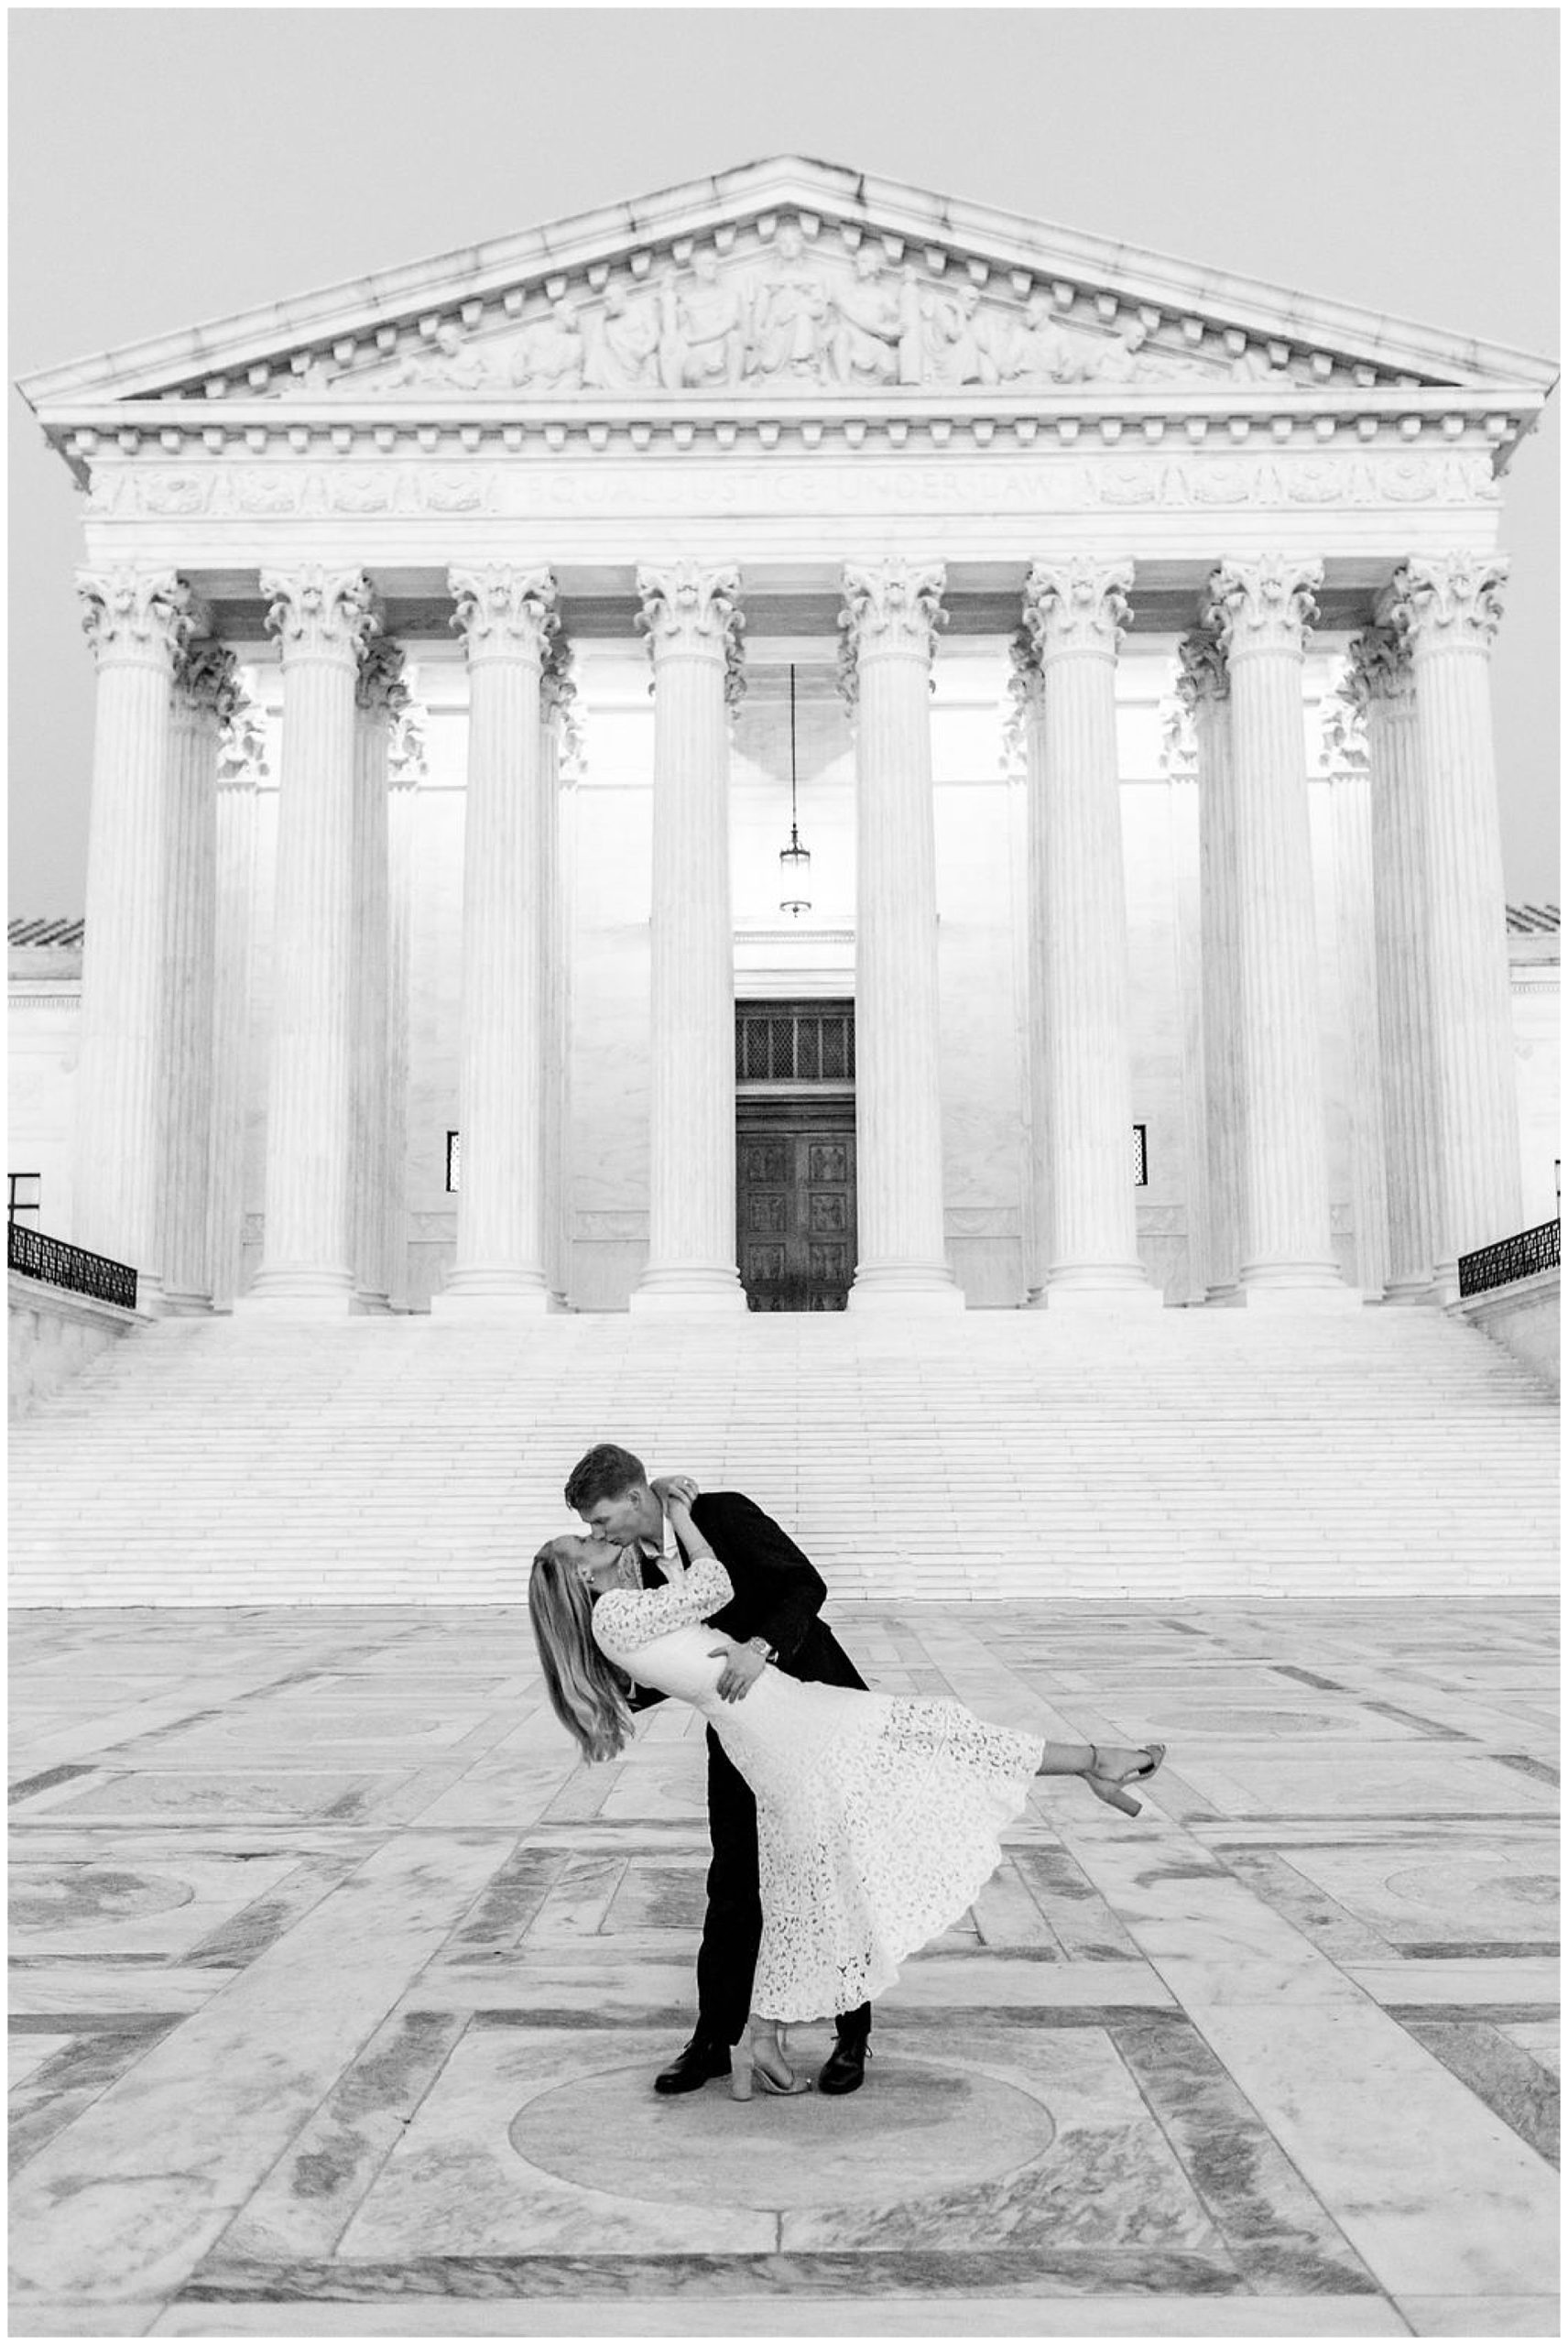 autumn magic hour engagement session, Washington D.C. engagement photos, Georgetown engagement photos, autumn engagement photos, DC portraits, DC engagement portraits, save the dates photos, Rachel E.H. Photography, couple kissing, black and white